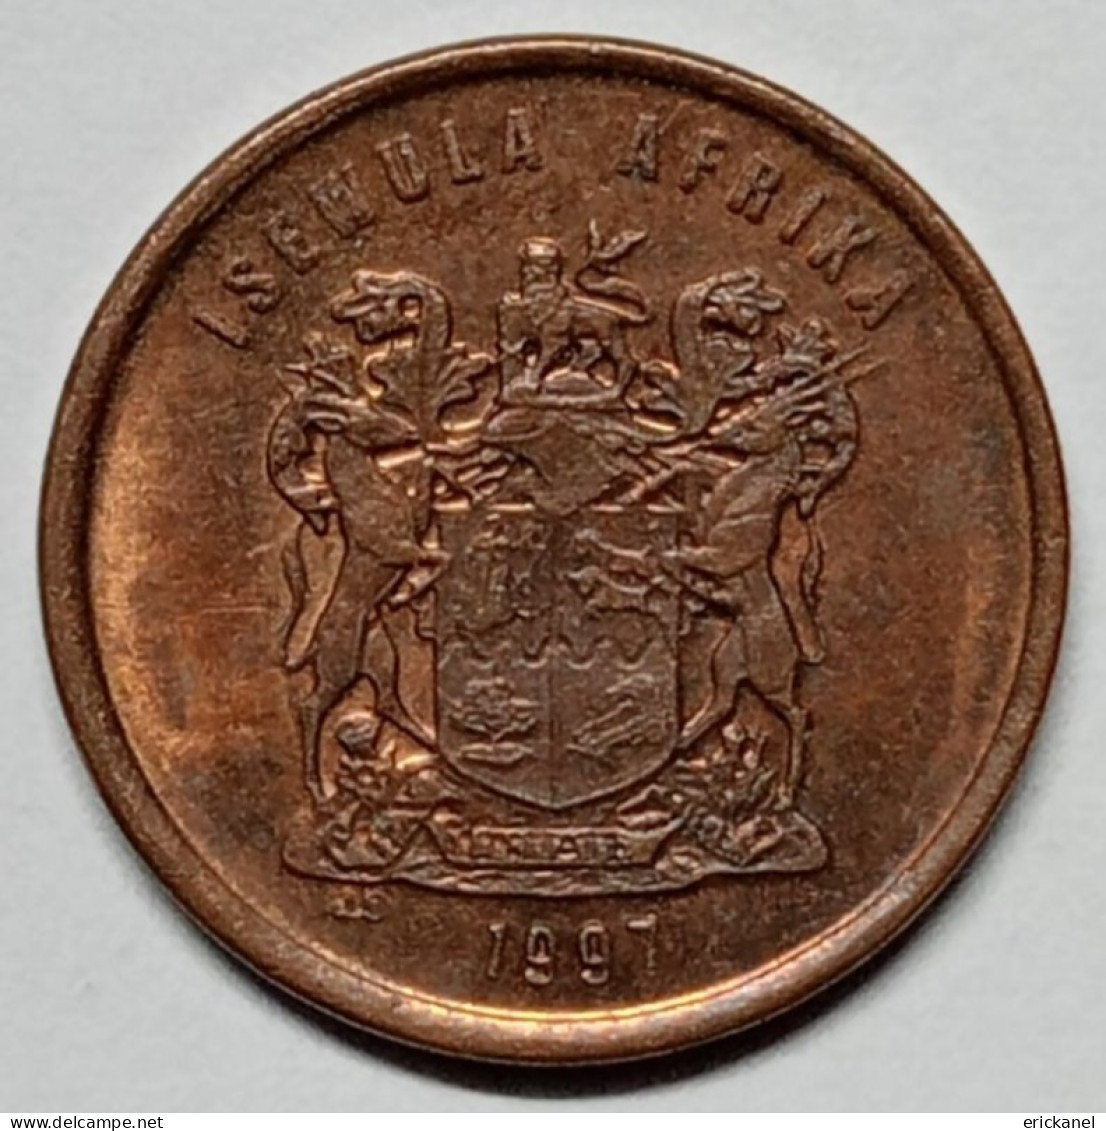 SOUTH AFRICA 1997 1 CENT - Sud Africa